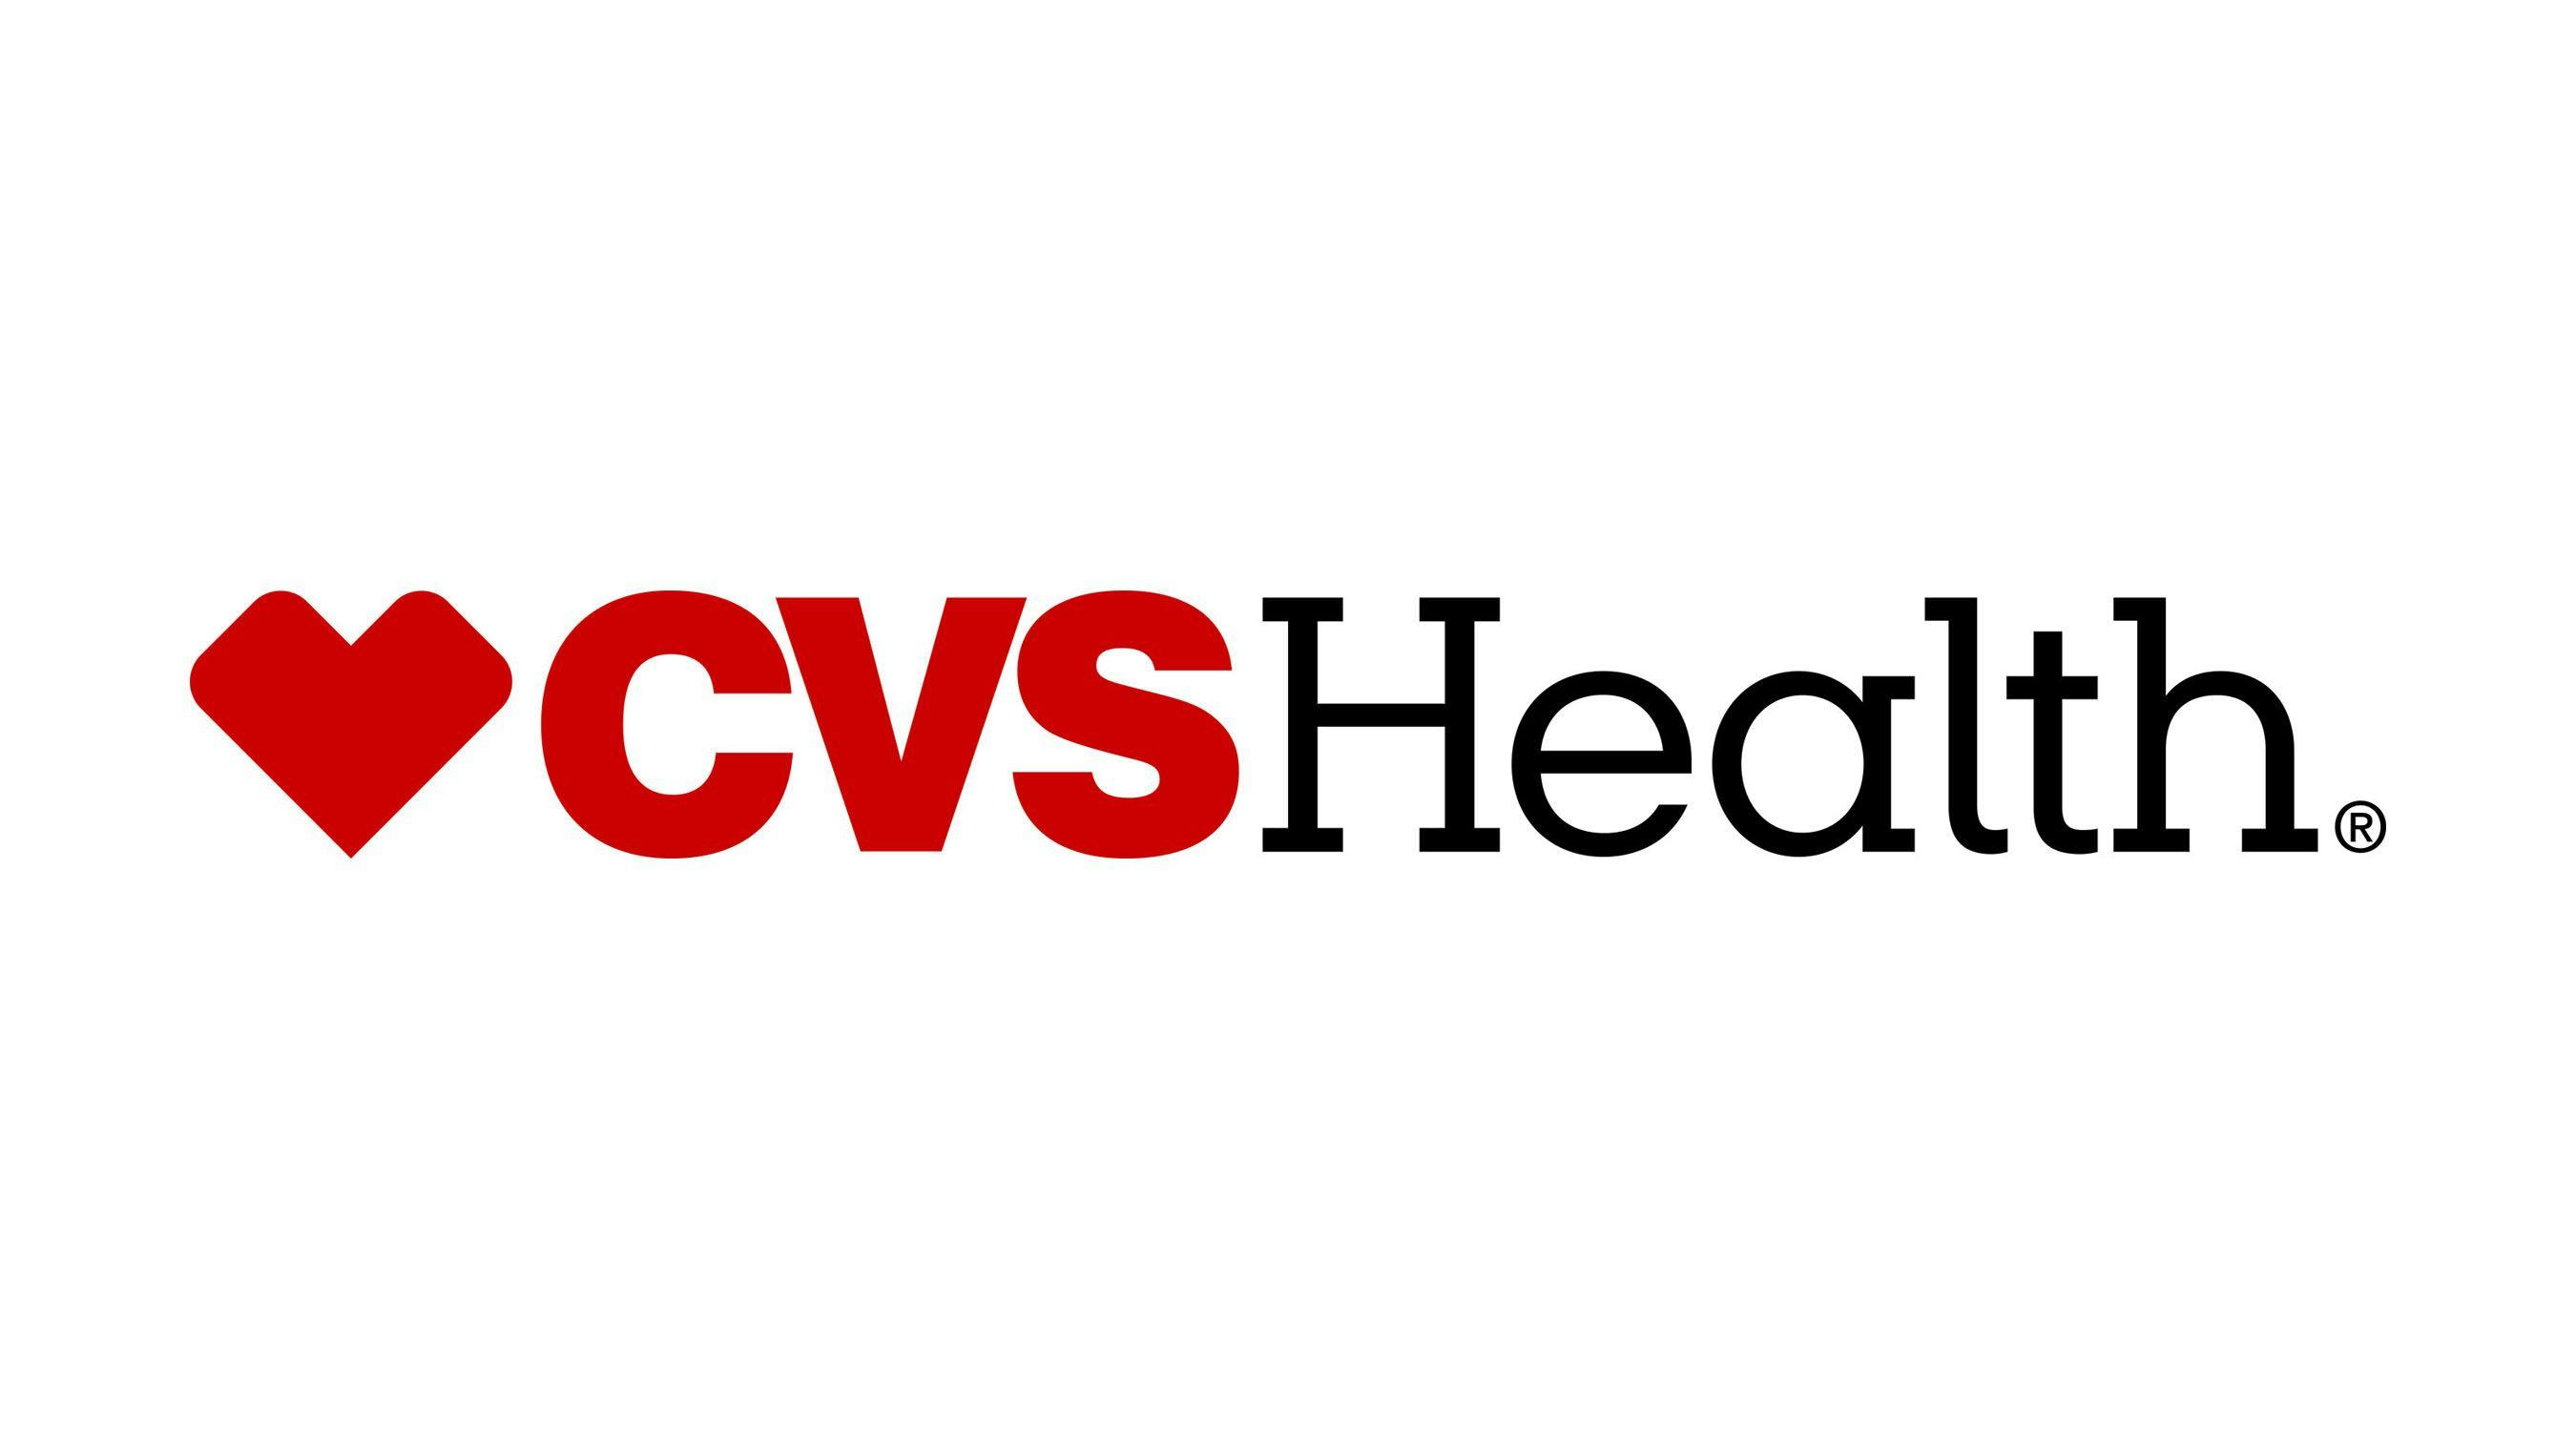 What Does CVS Health’s Purchase of Signify Health Signify?